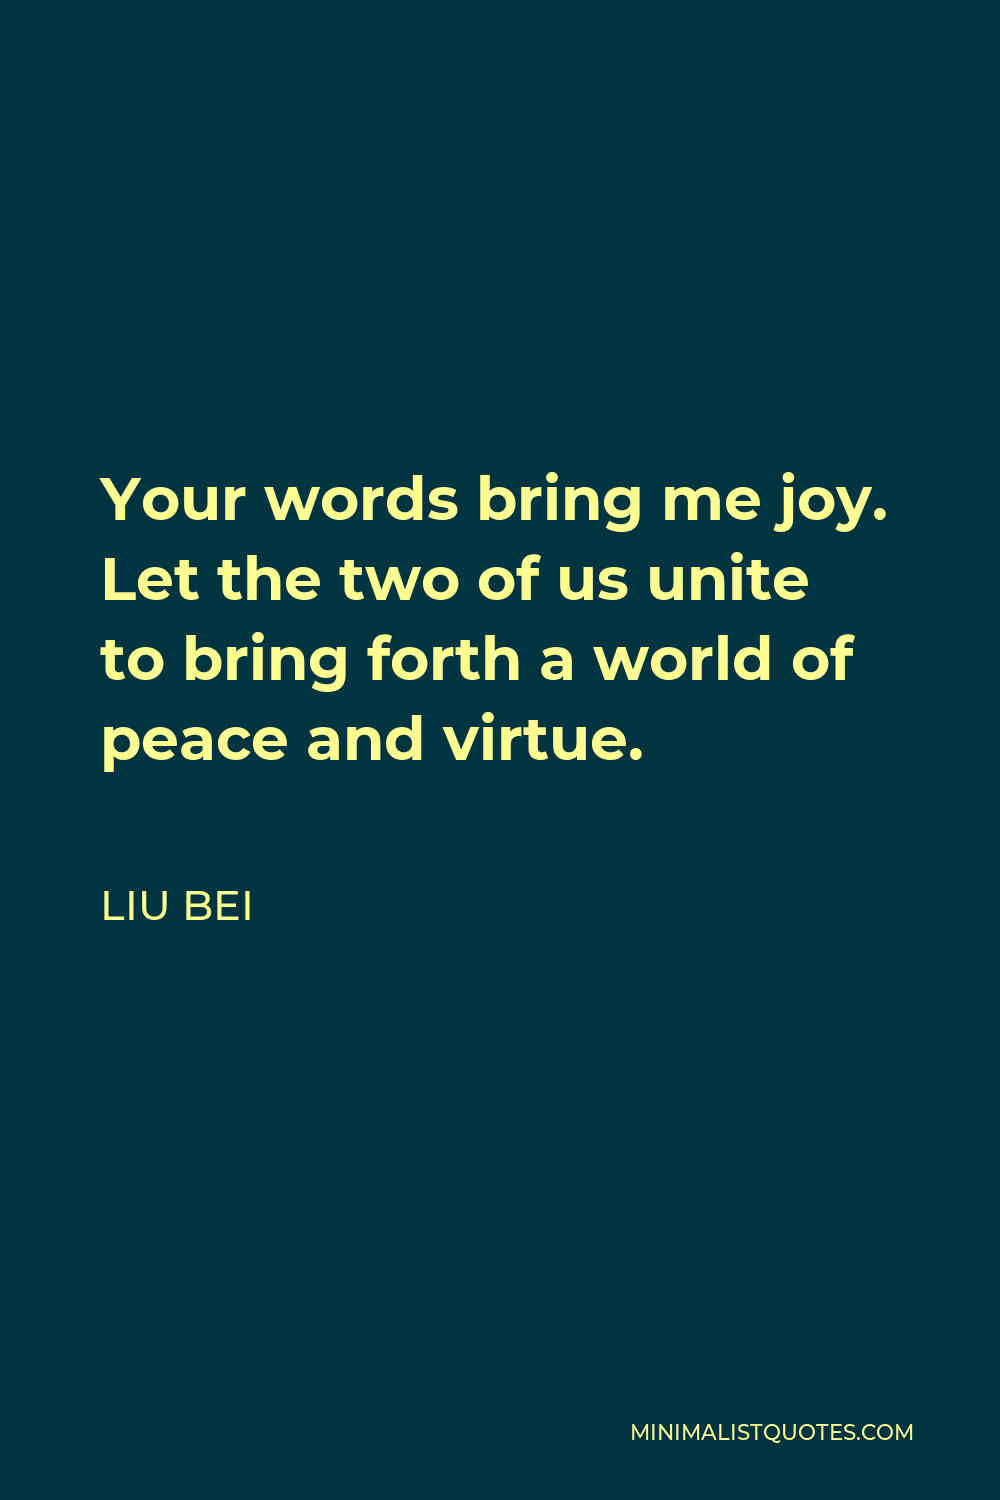 Liu Bei quote: Your words bring me joy. Let the two of us